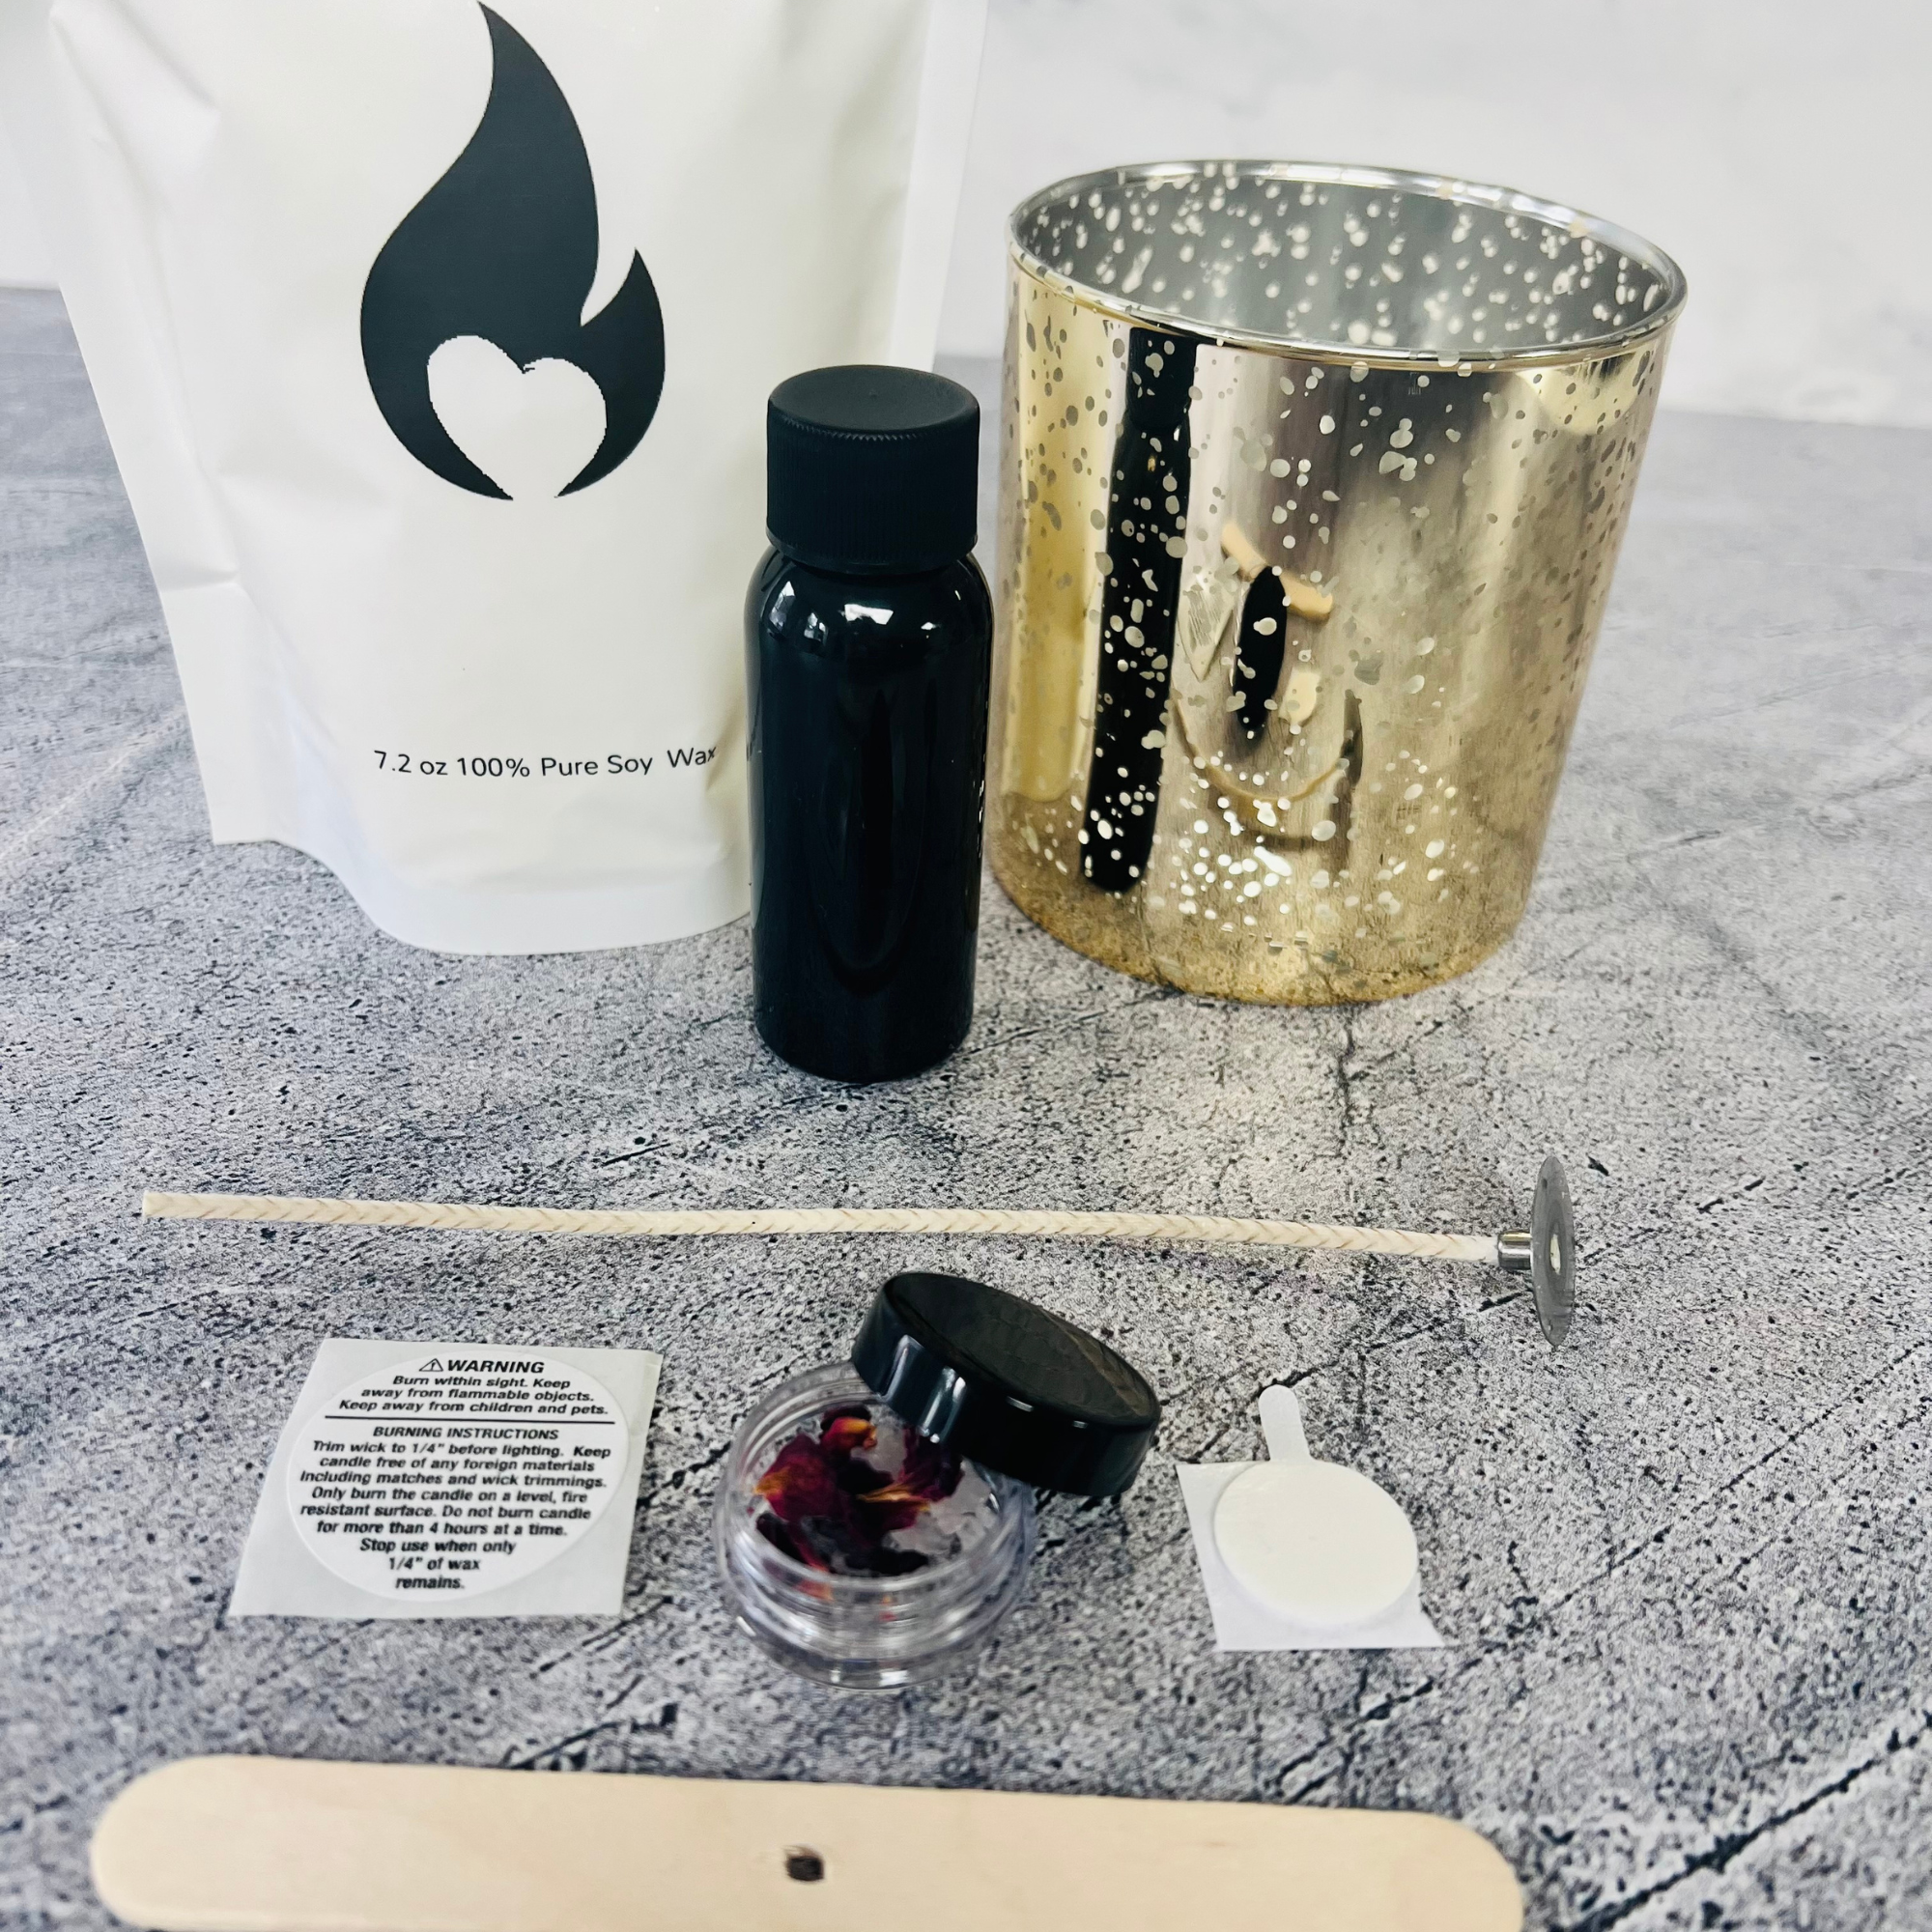 wooden wick holder warning label small plastic container with rose petals and rose quartz wick sticker cotton wick white bag with black flame logo small black bottle gold metallic vessel